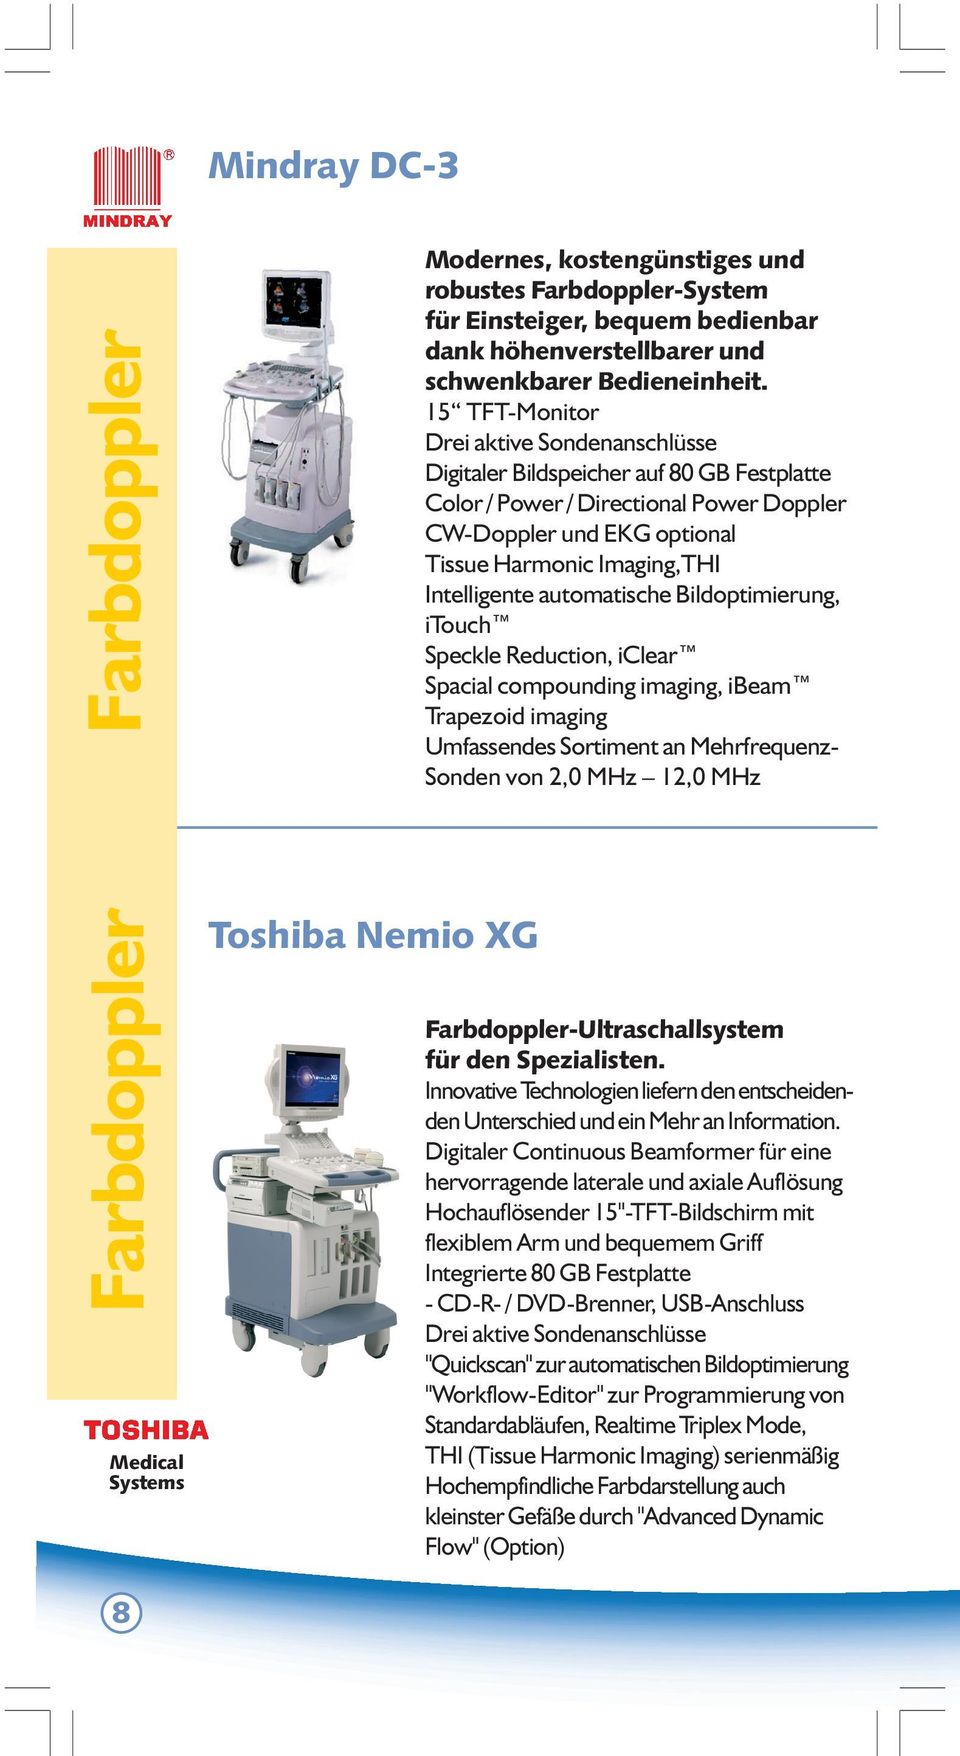 Bildoptimierung, itouch Speckle Reduction, iclear Spacial compounding imaging, ibeam Trapezoid imaging Umfassendes Sortiment an Mehrfrequenz- Sonden von 2,0 MHz 12,0 MHz Farbdoppler Medical Systems